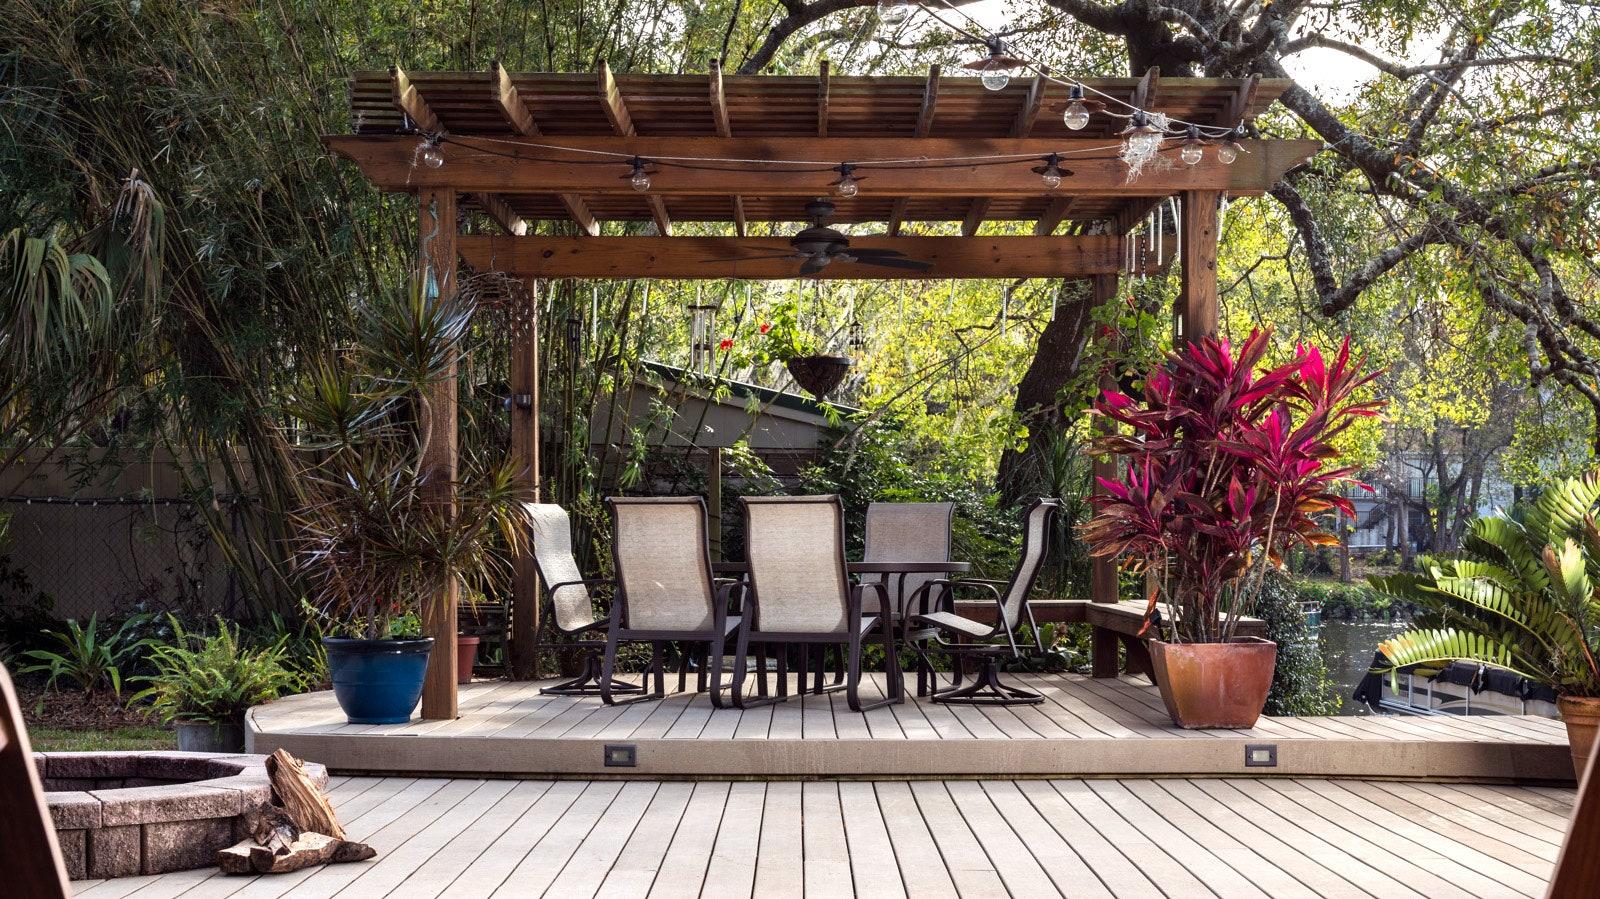 Deck Ideas For The Ultimate Backyard Architectural Digest